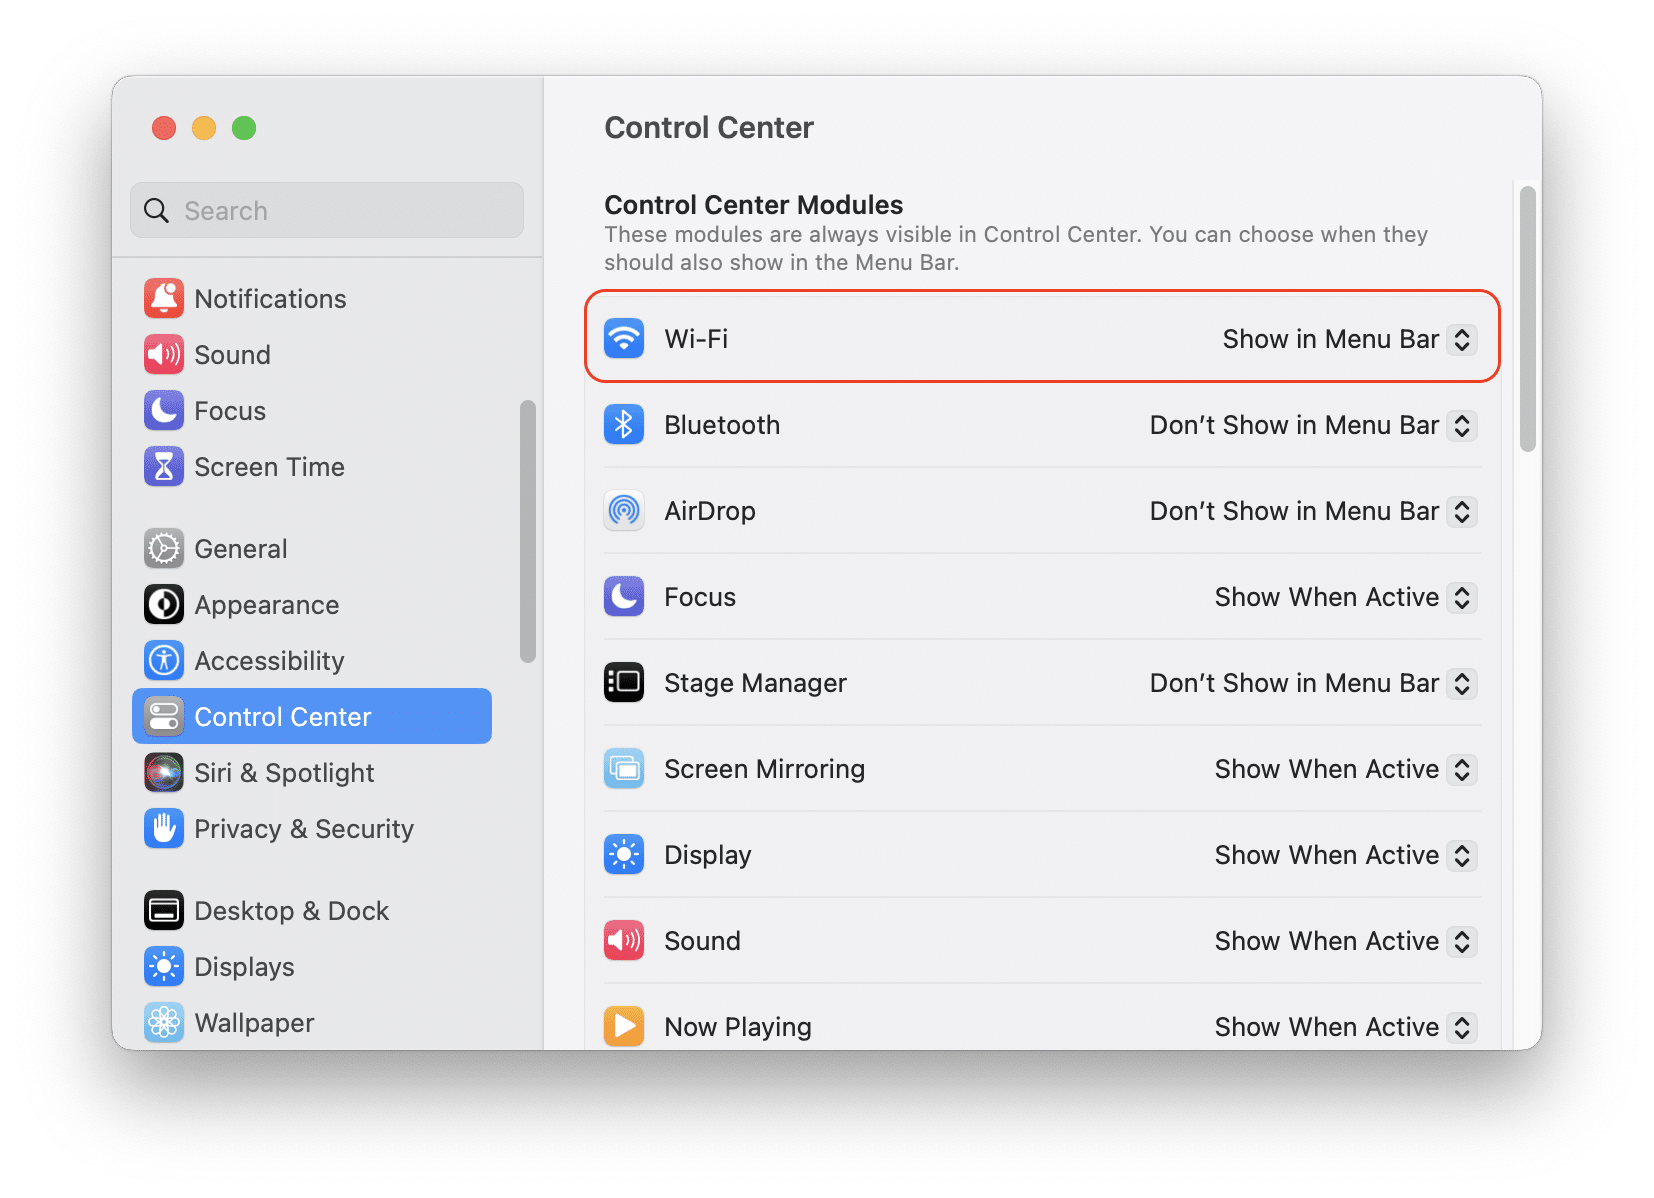 System settings window showing how to enable displaying Wi-Fi status in menu bar